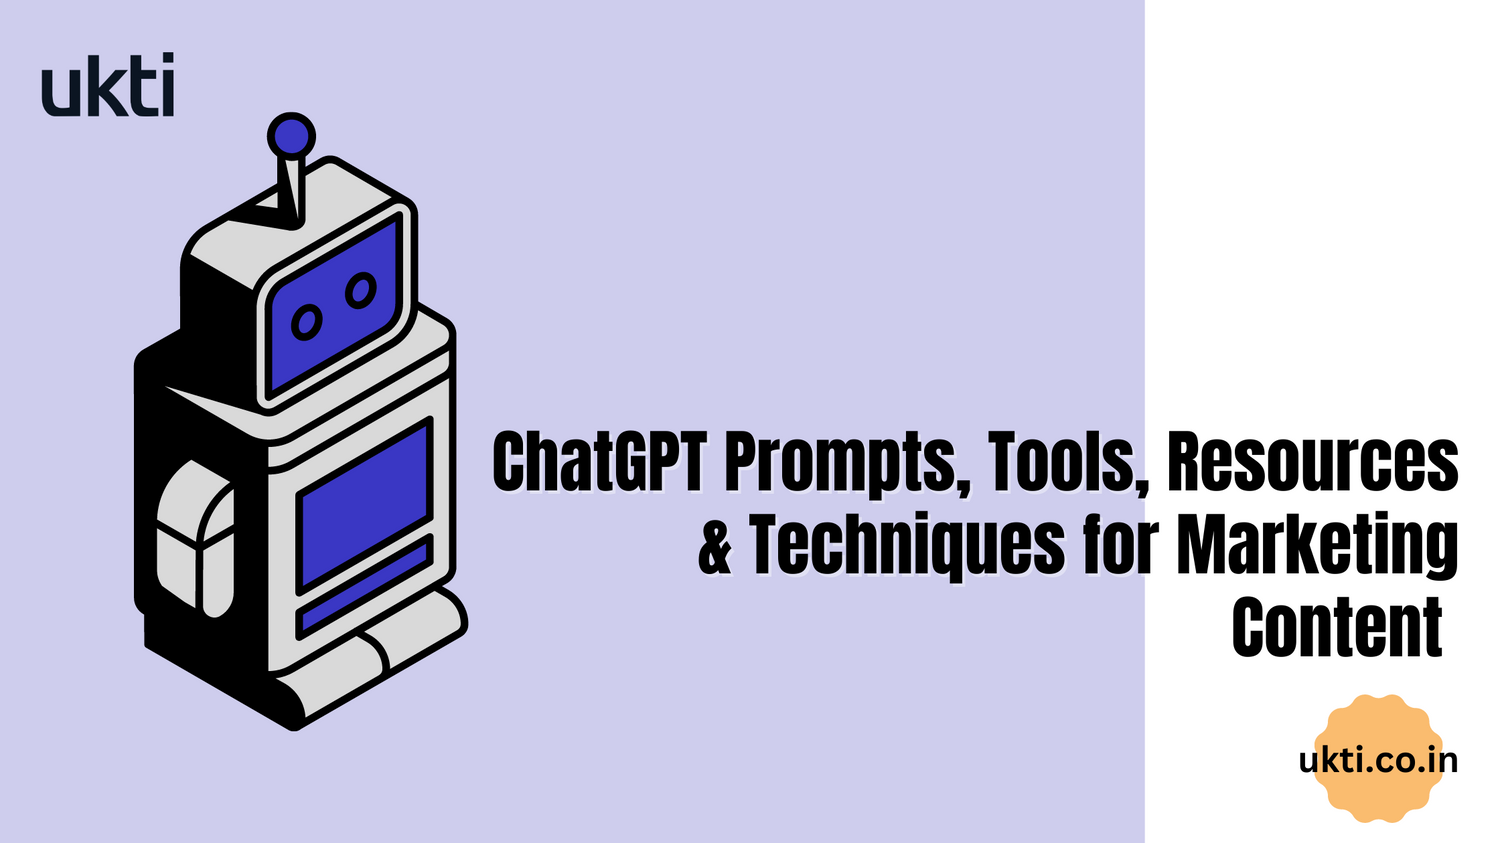 ChatGPT prompts for marketing content